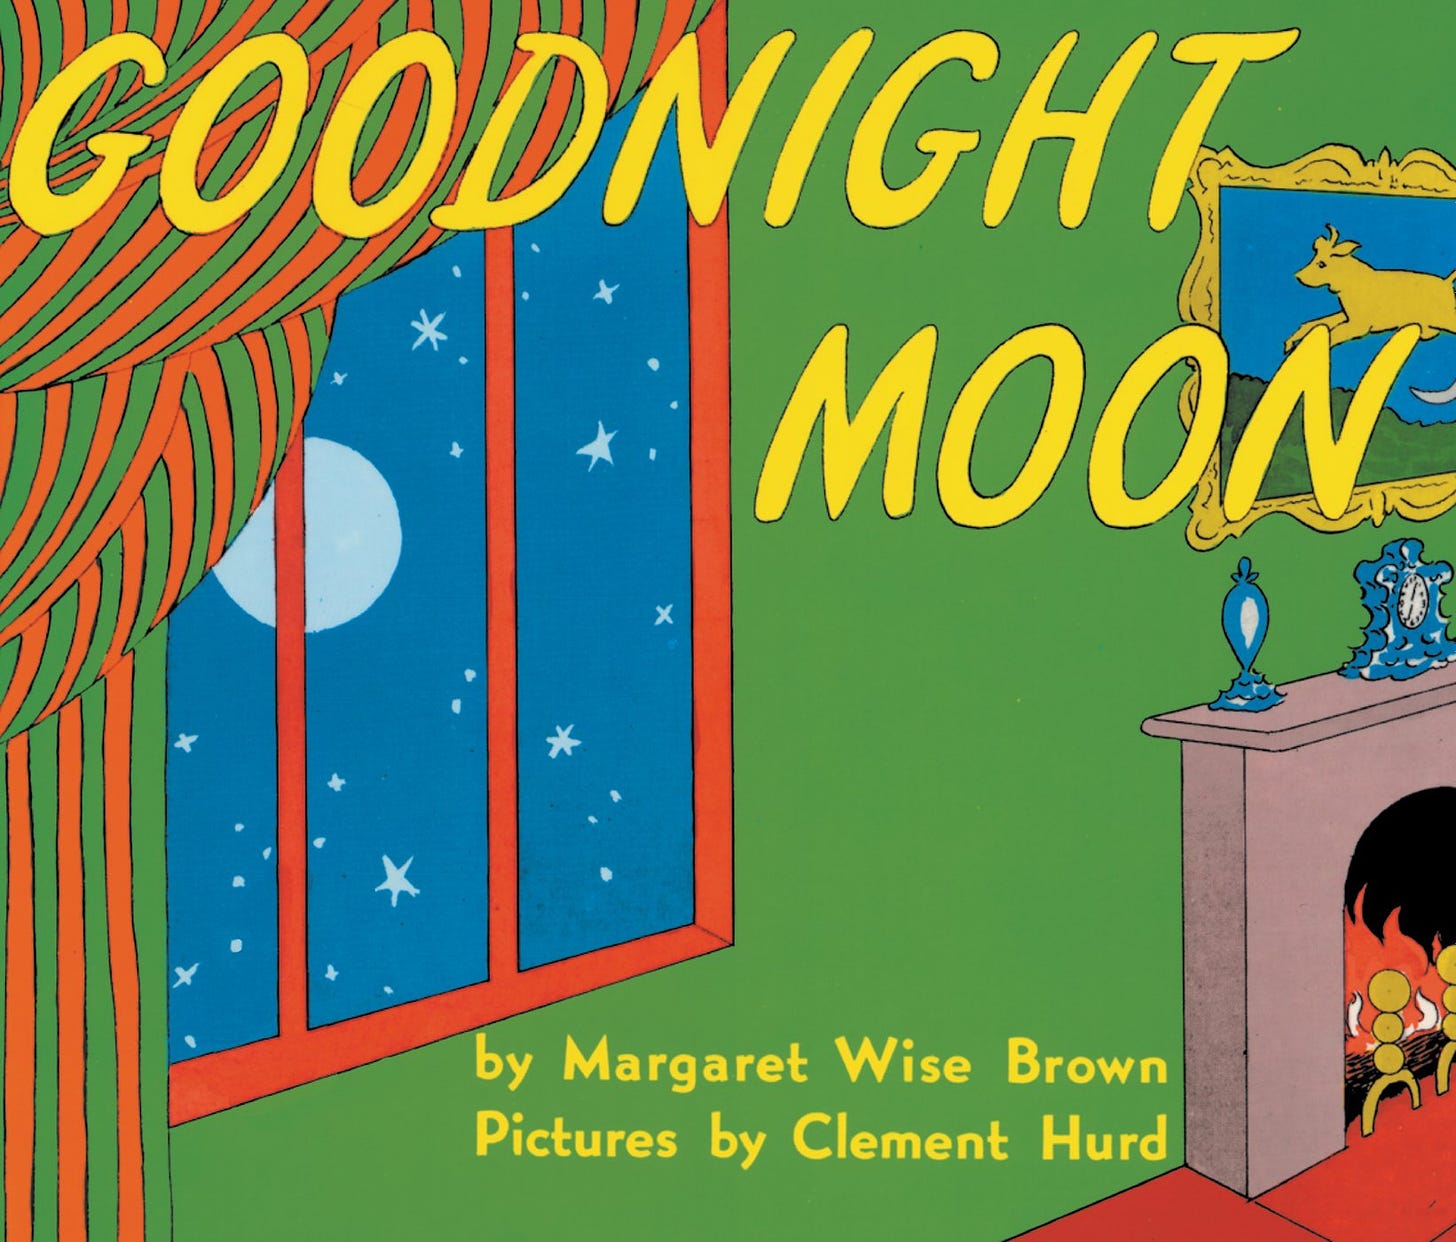 Goodnight Moon book cover image.